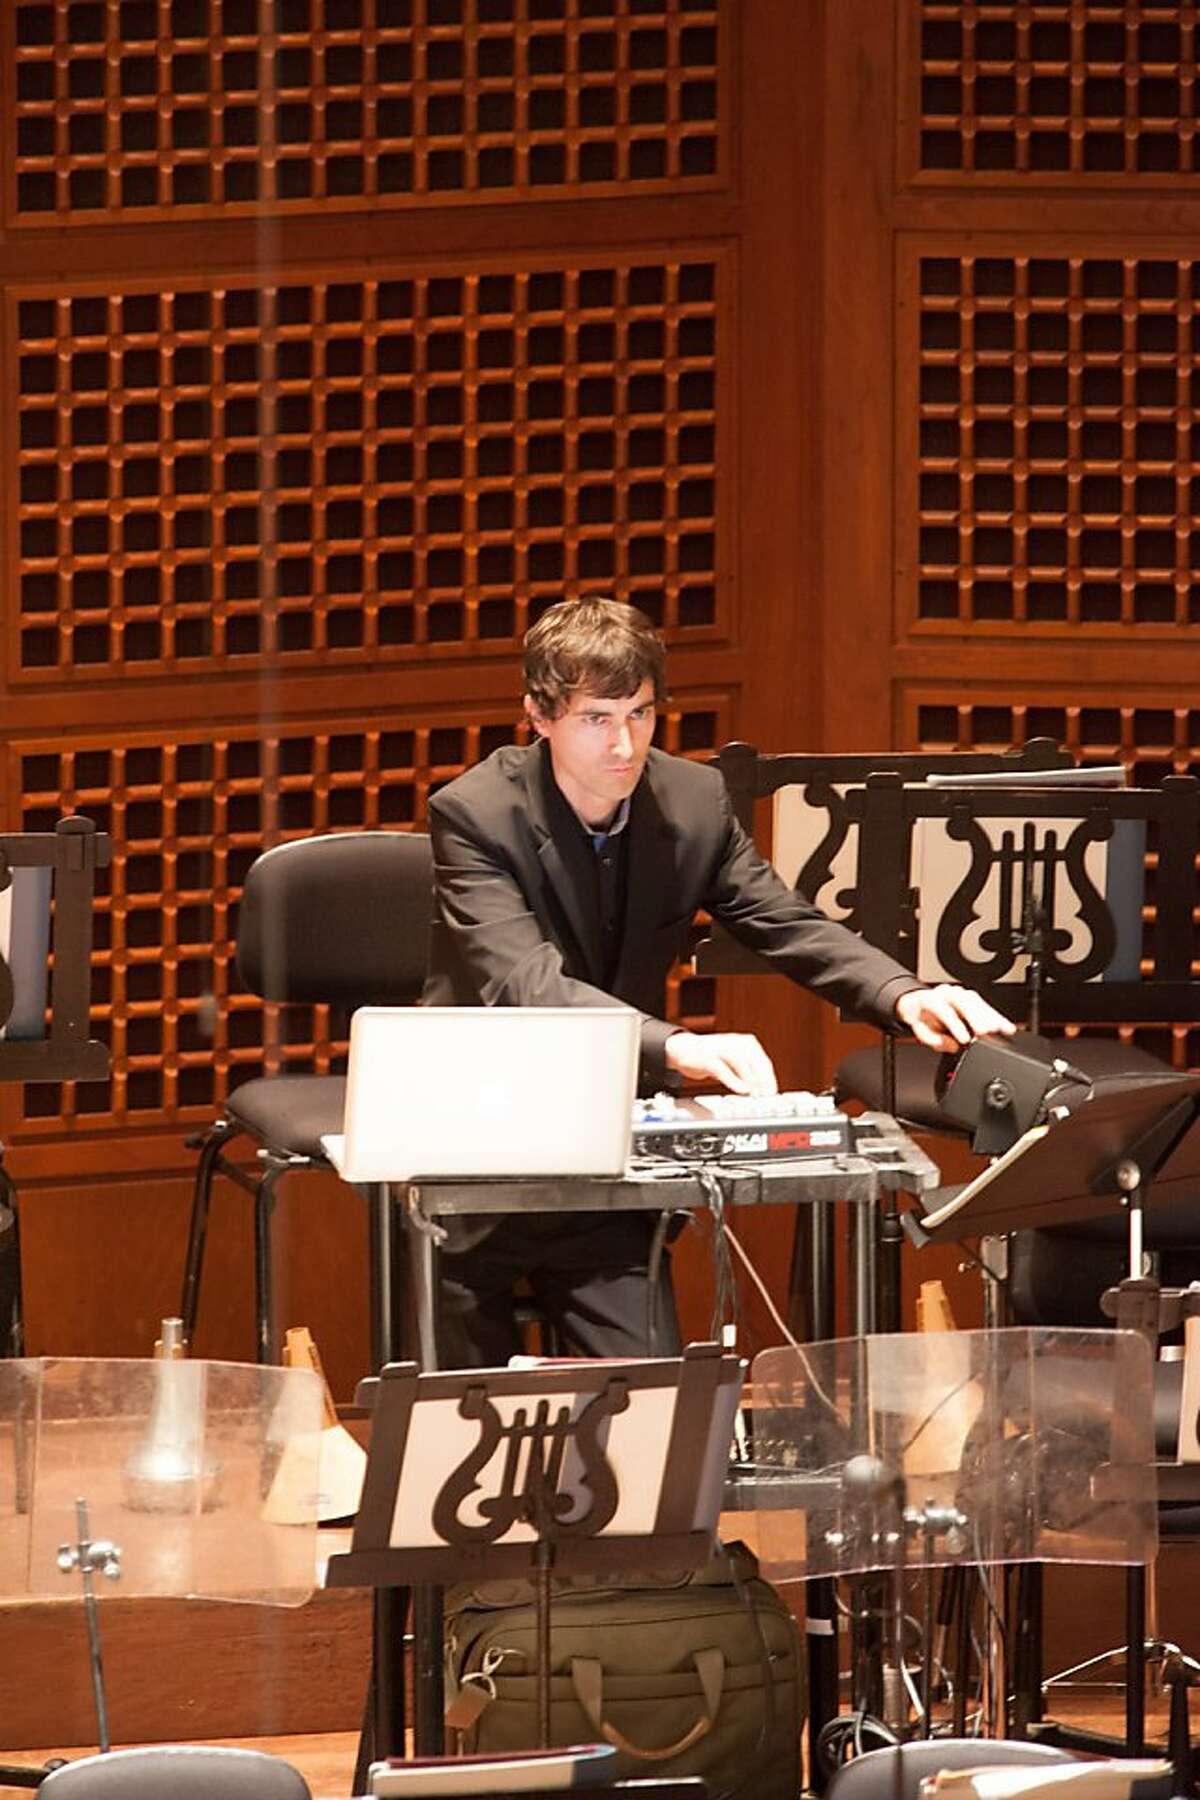 Composer Mason Bates controlling the electronica in the premiere of his "Mass Transmission" 3/15/12